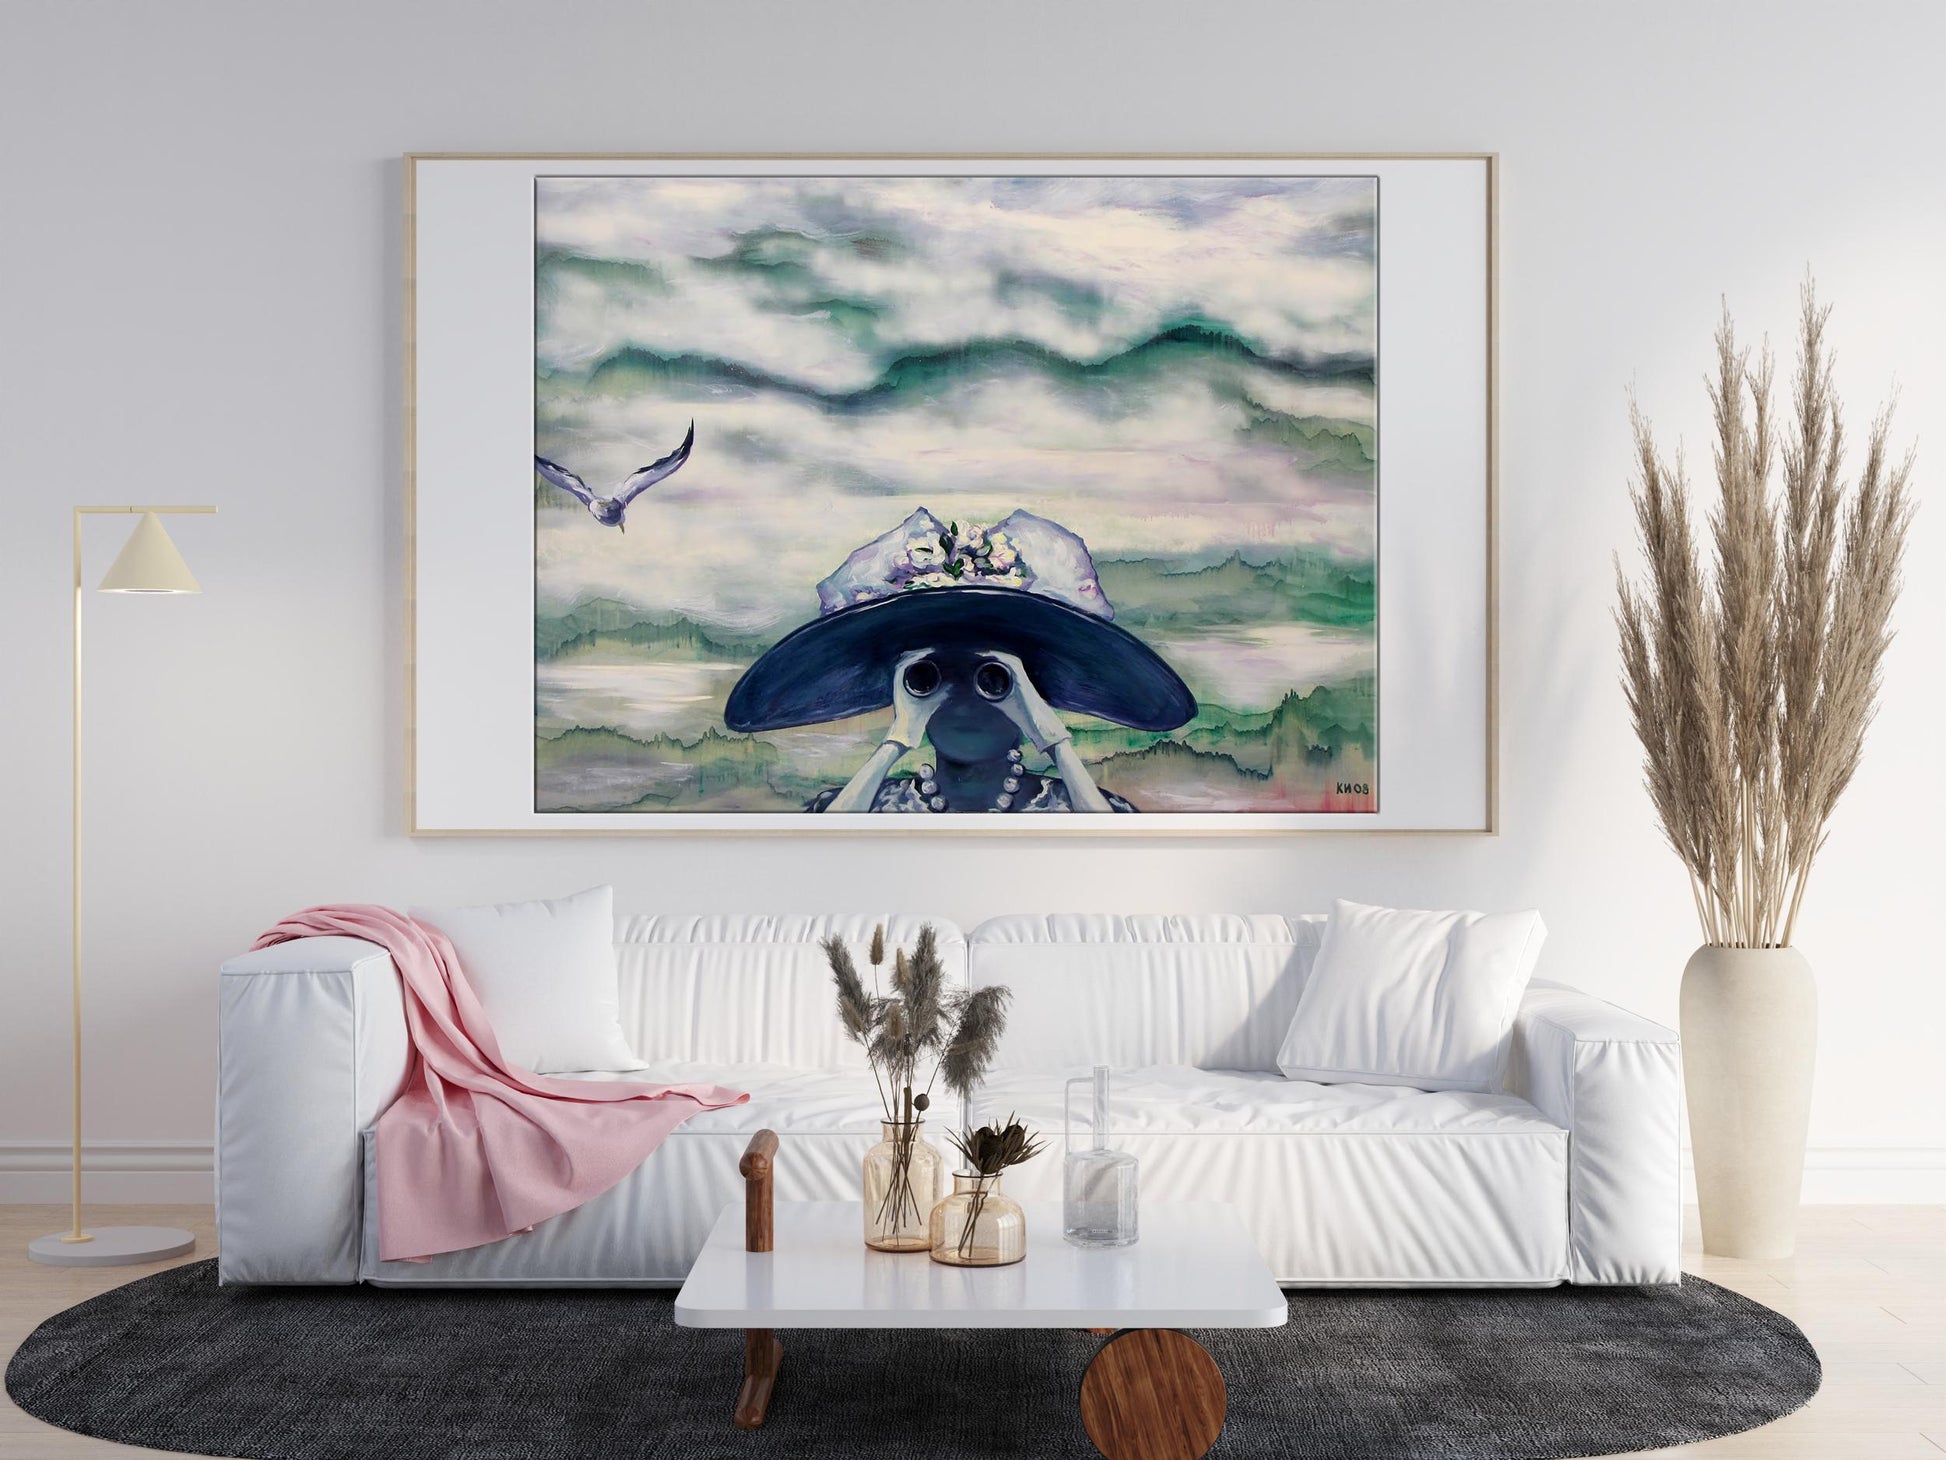 The painting Far from near by Ihor Konovalov is exhibited in the guest room